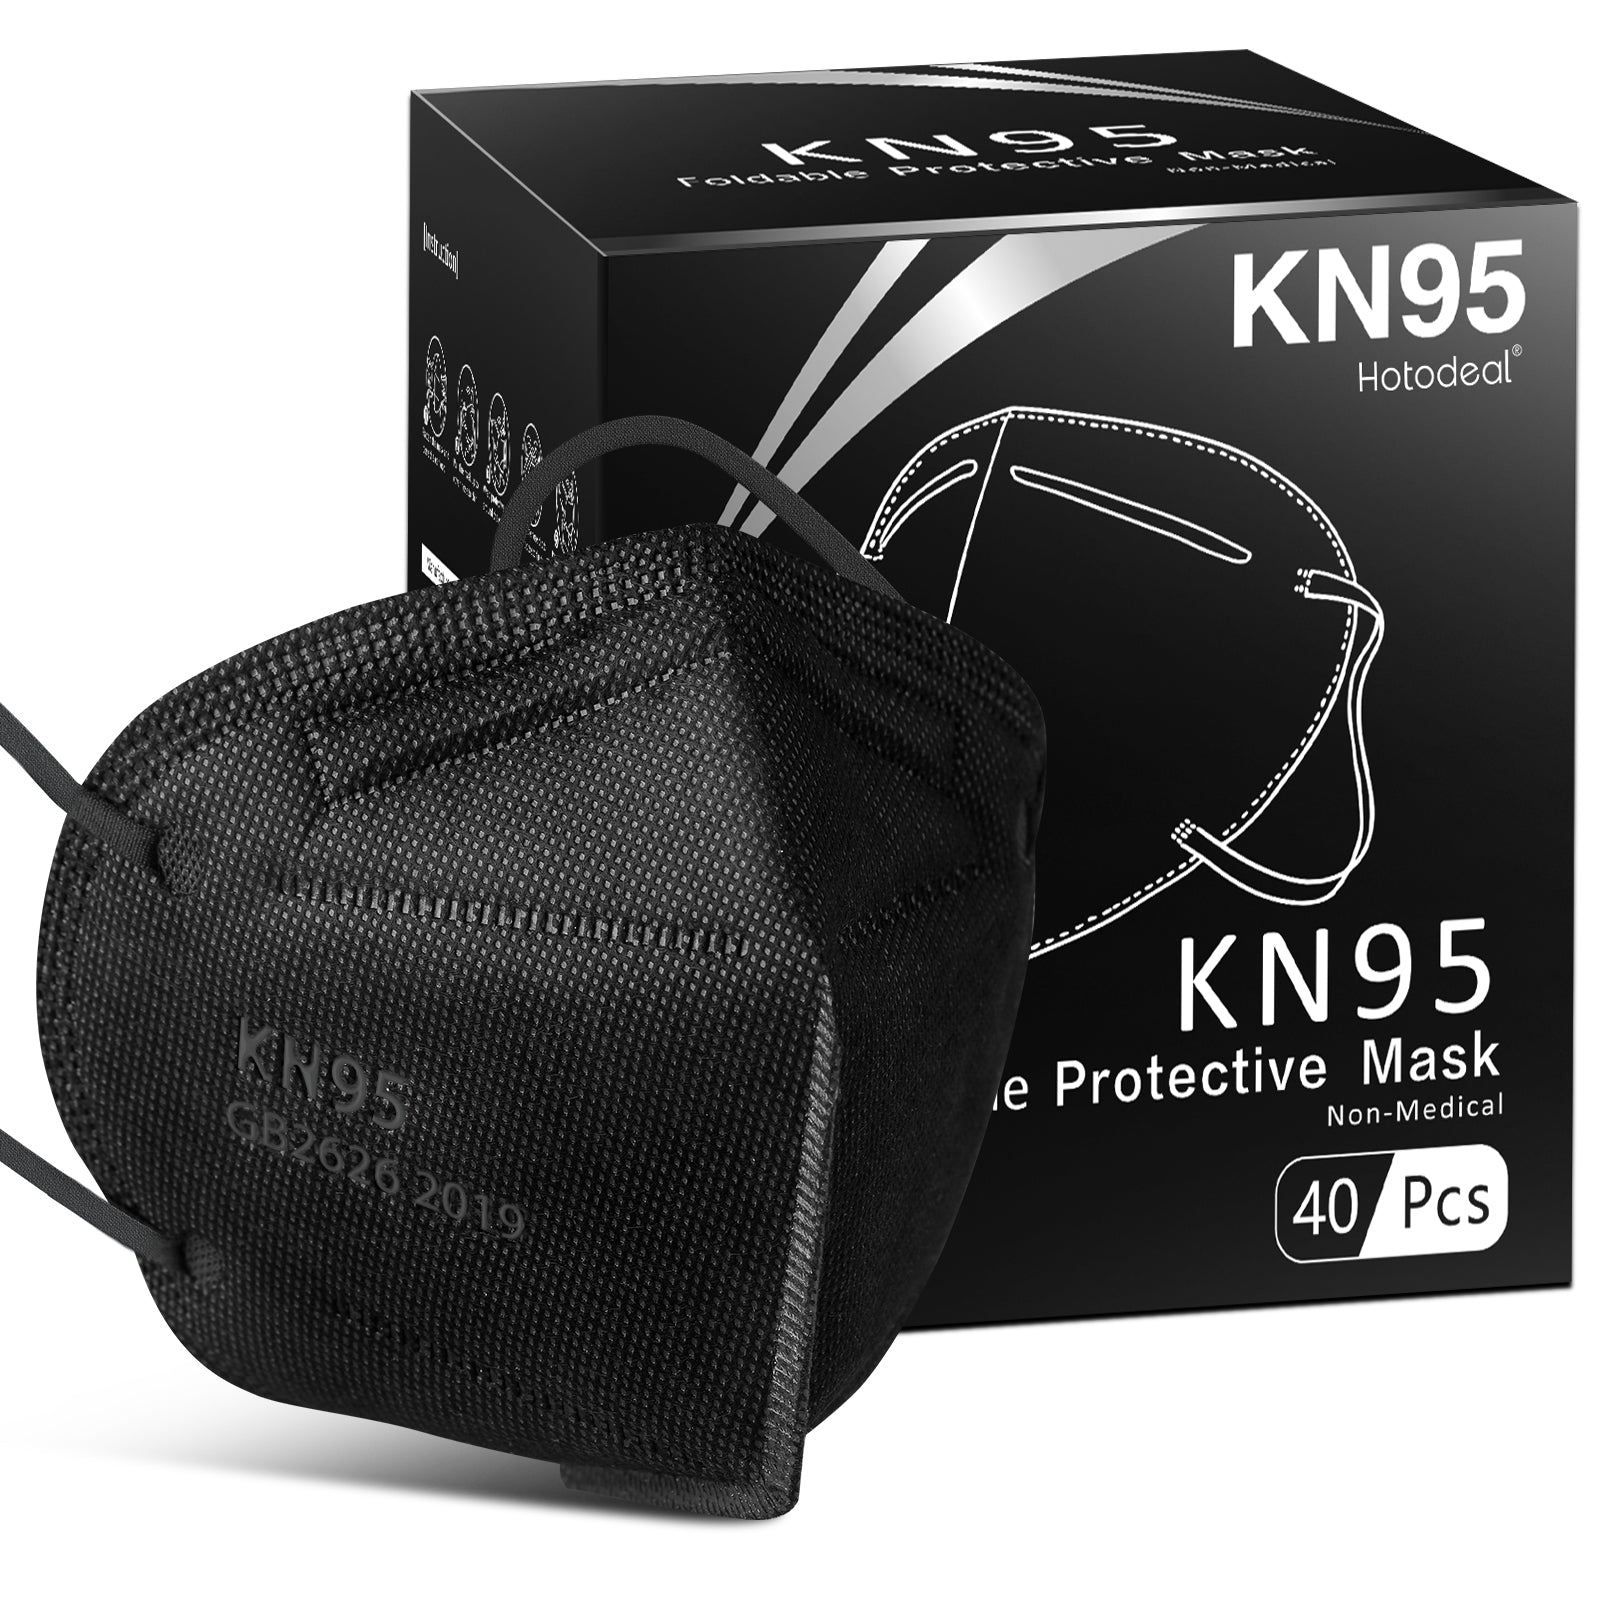 KN95 Face Mask 40 PCs (Black)- Filter Efficiency≥95%, 5 Layers Cup Dust Mask, Masks Against PM2.5